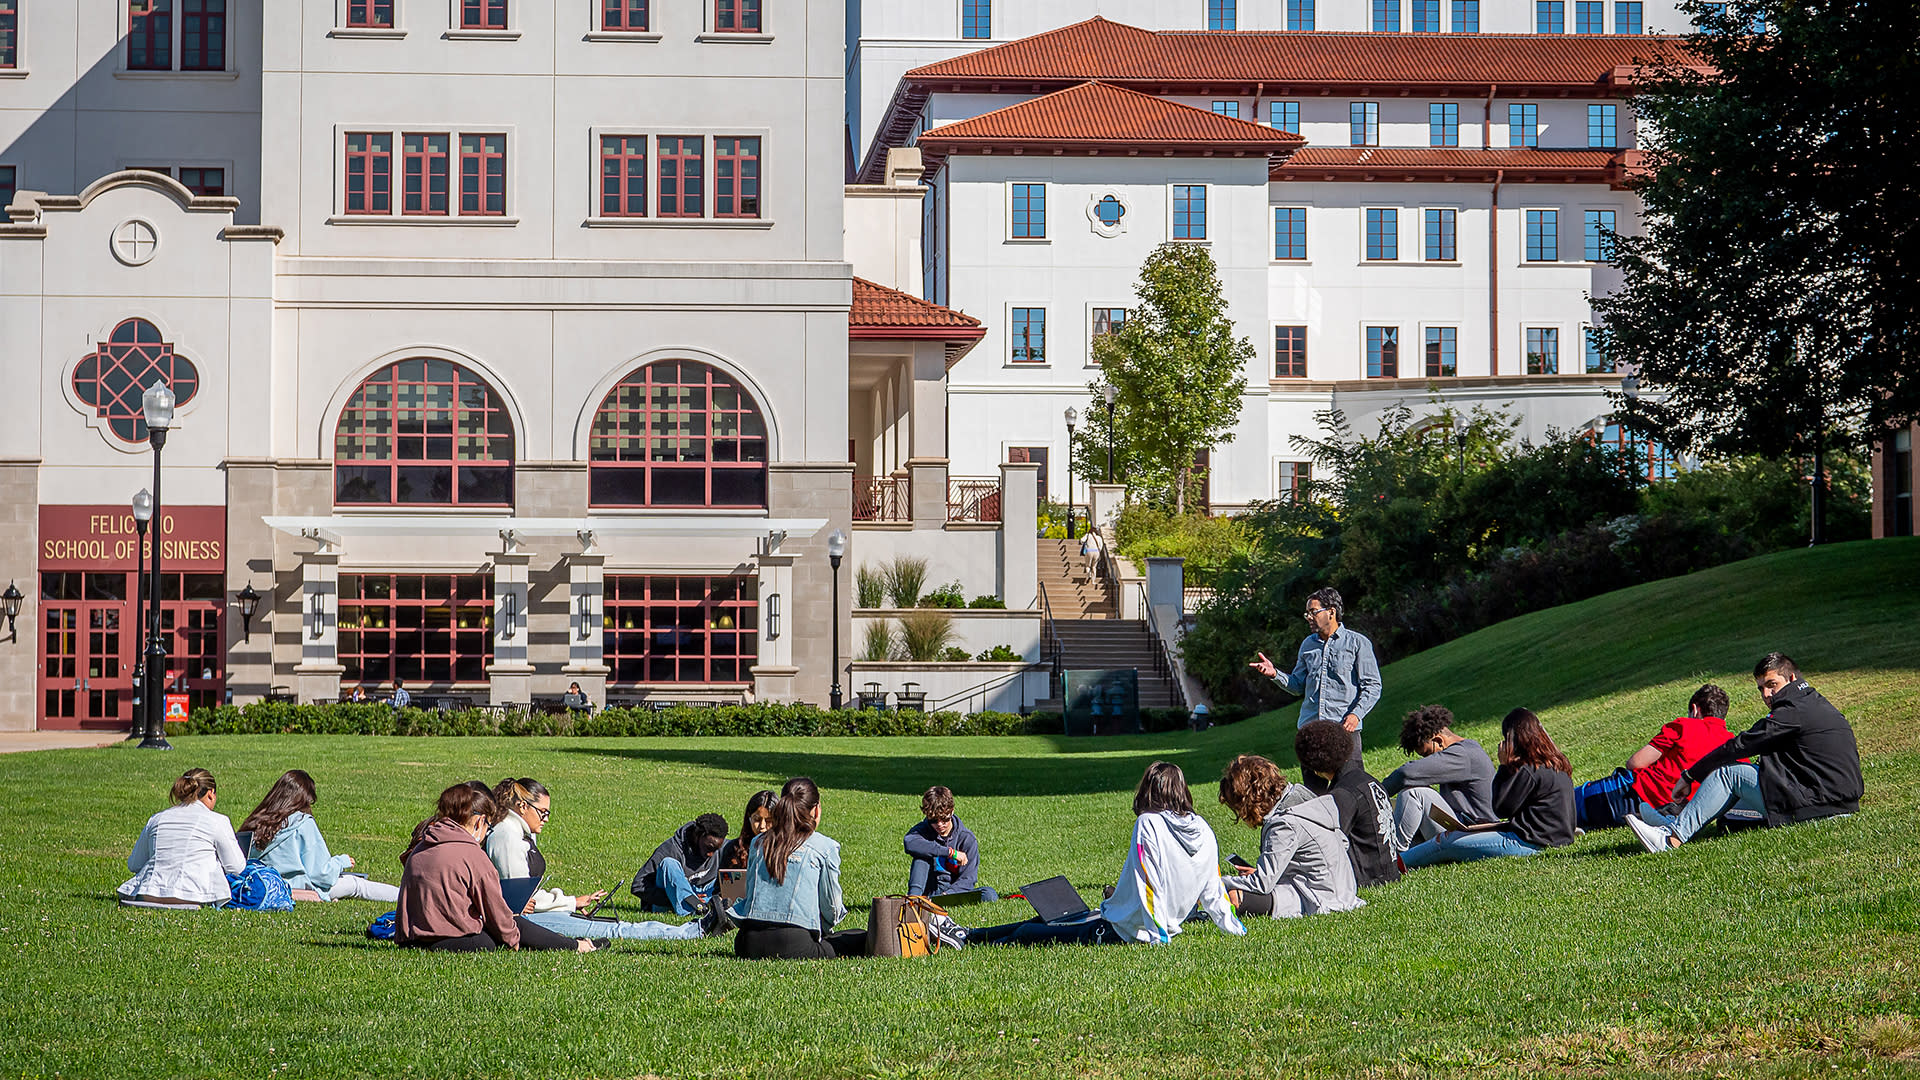 Image of students sitting in grass in front of Montclair State University building.